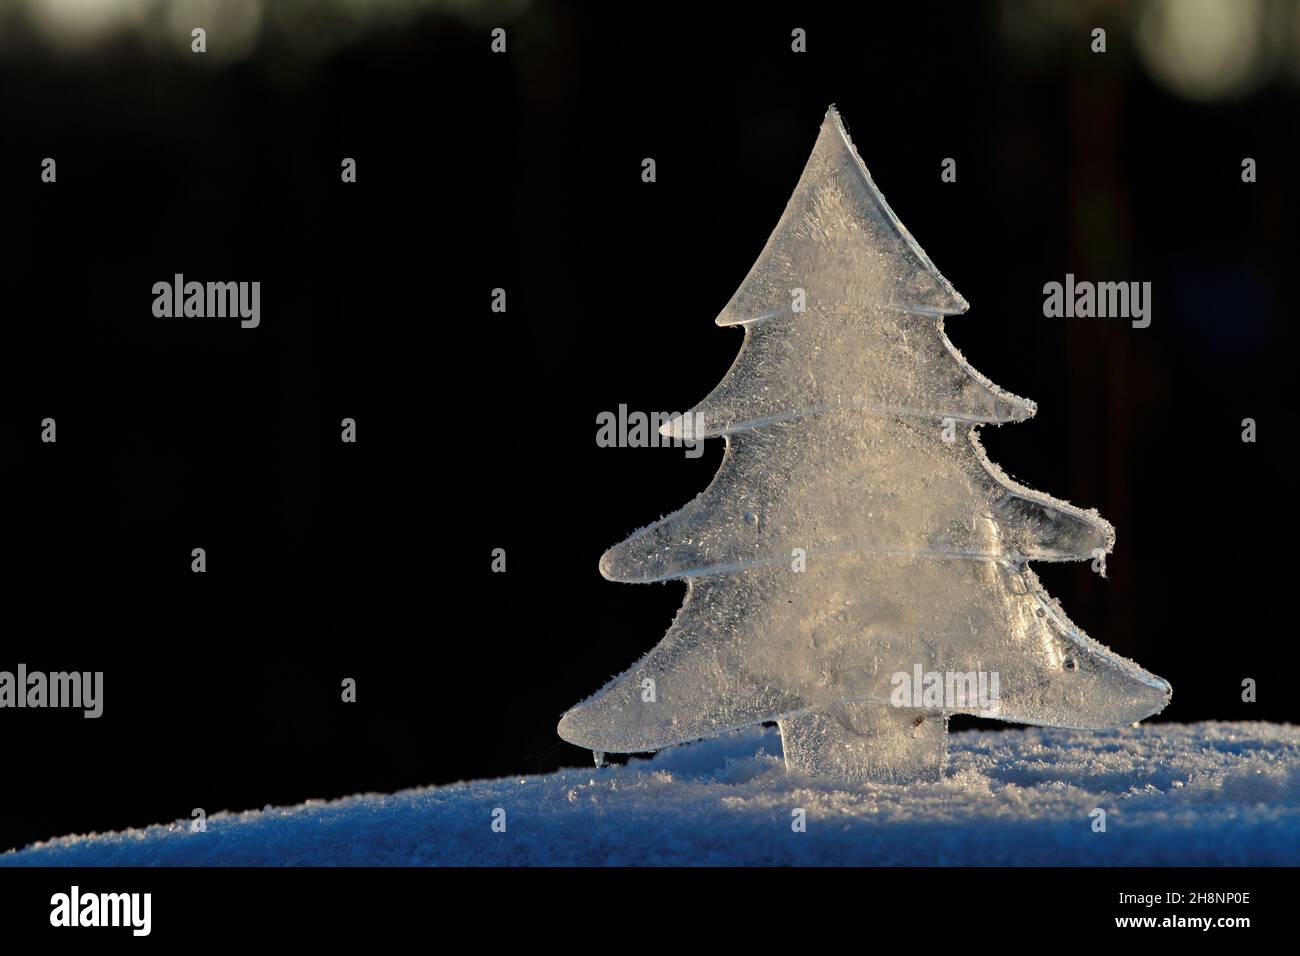 https://c8.alamy.com/comp/2H8NP0E/an-icy-christmas-tree-in-snow-with-dark-background-2H8NP0E.jpg